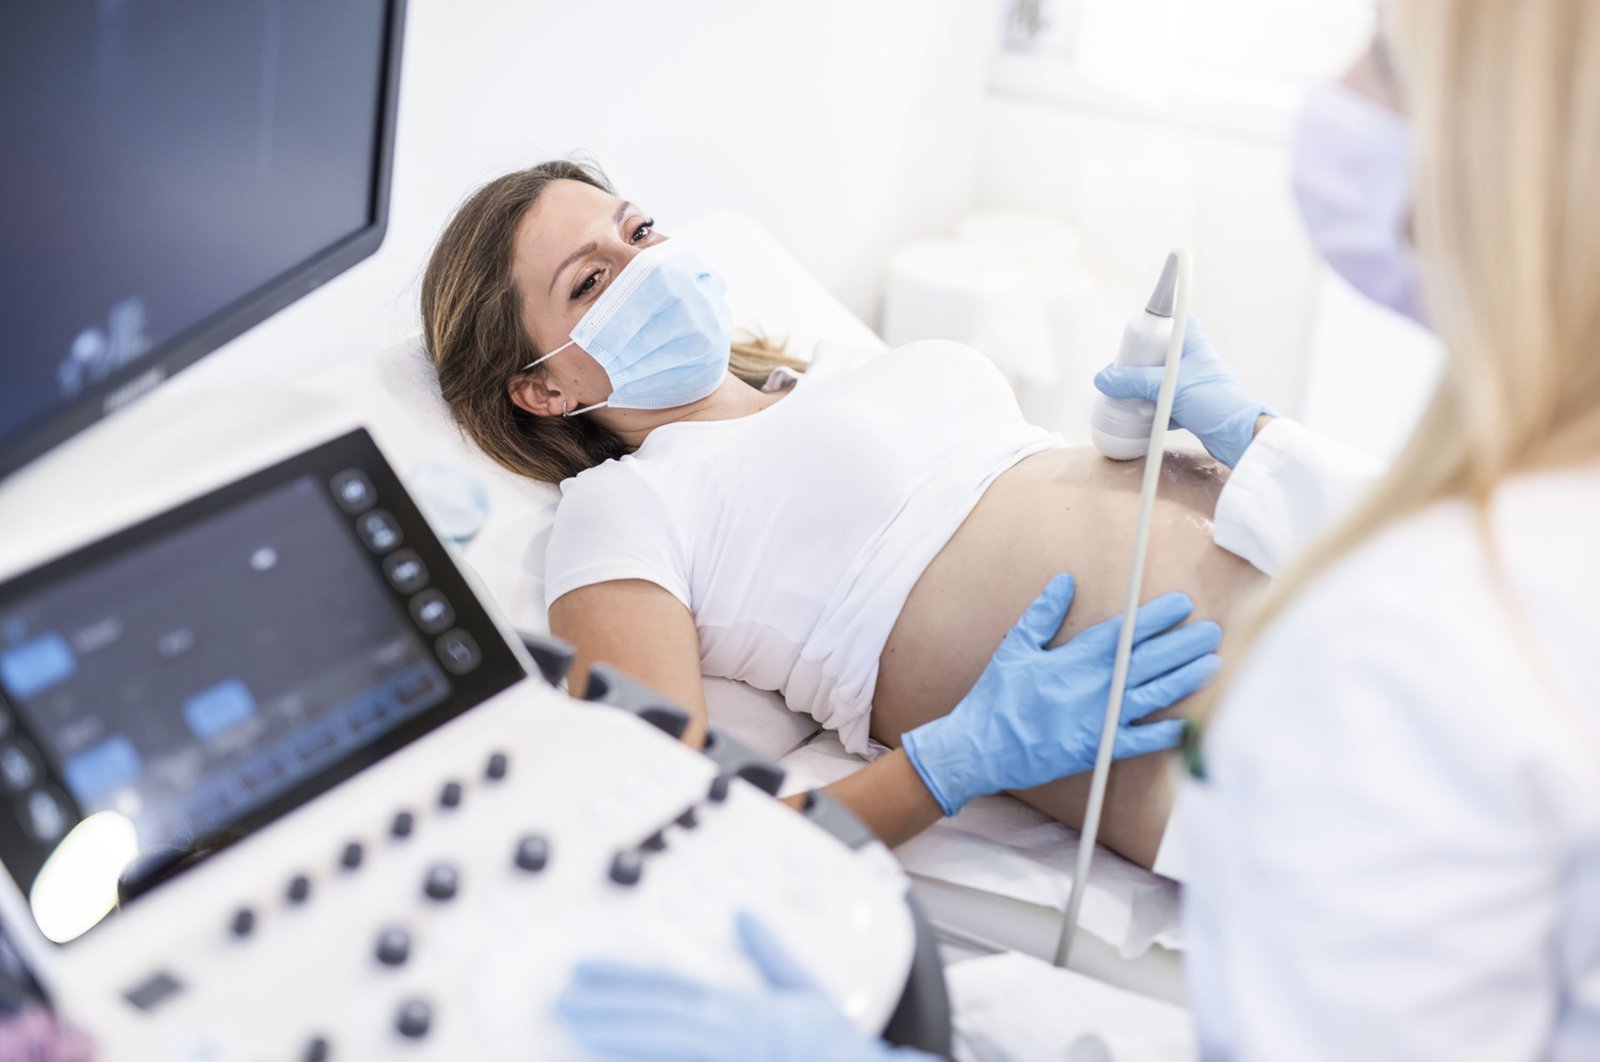 Ultrasound pregnancy examination of young woman in a medical clinic during a COVID-19 outbreak. (Getty Images)